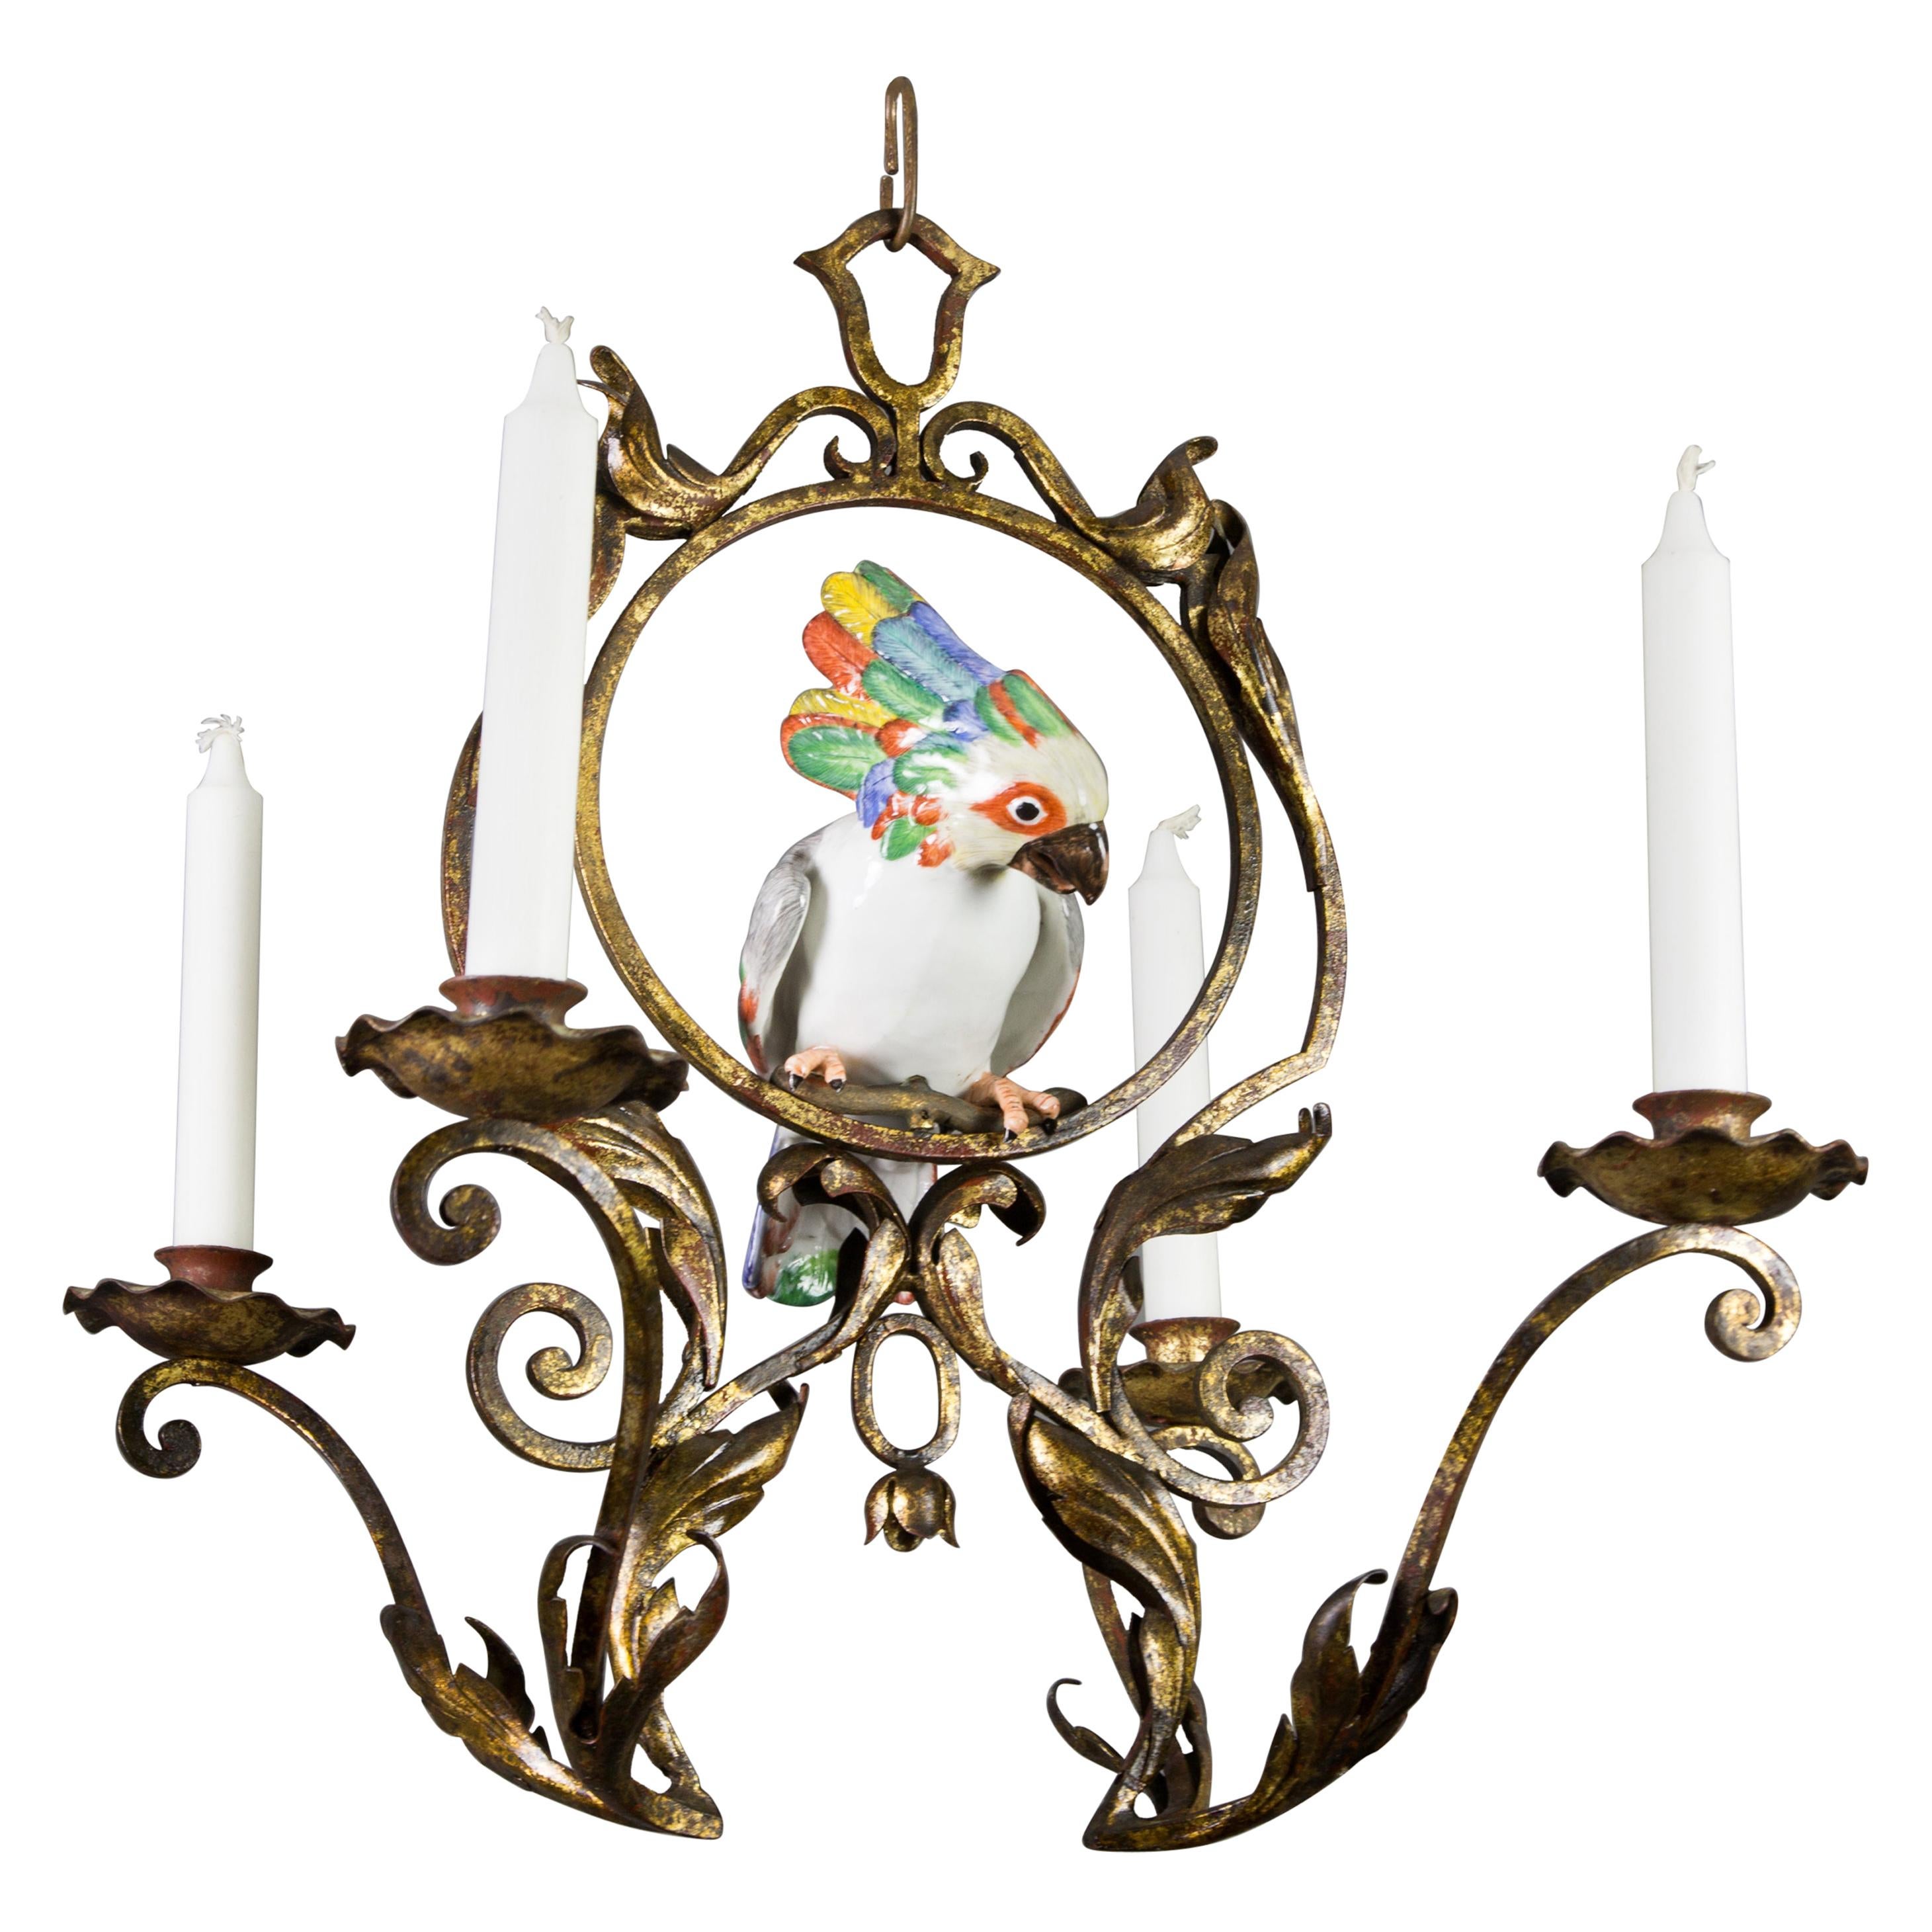 French Art Nouveau Wrought Iron and Porcelain Parrot Figurine Candle Chandelier